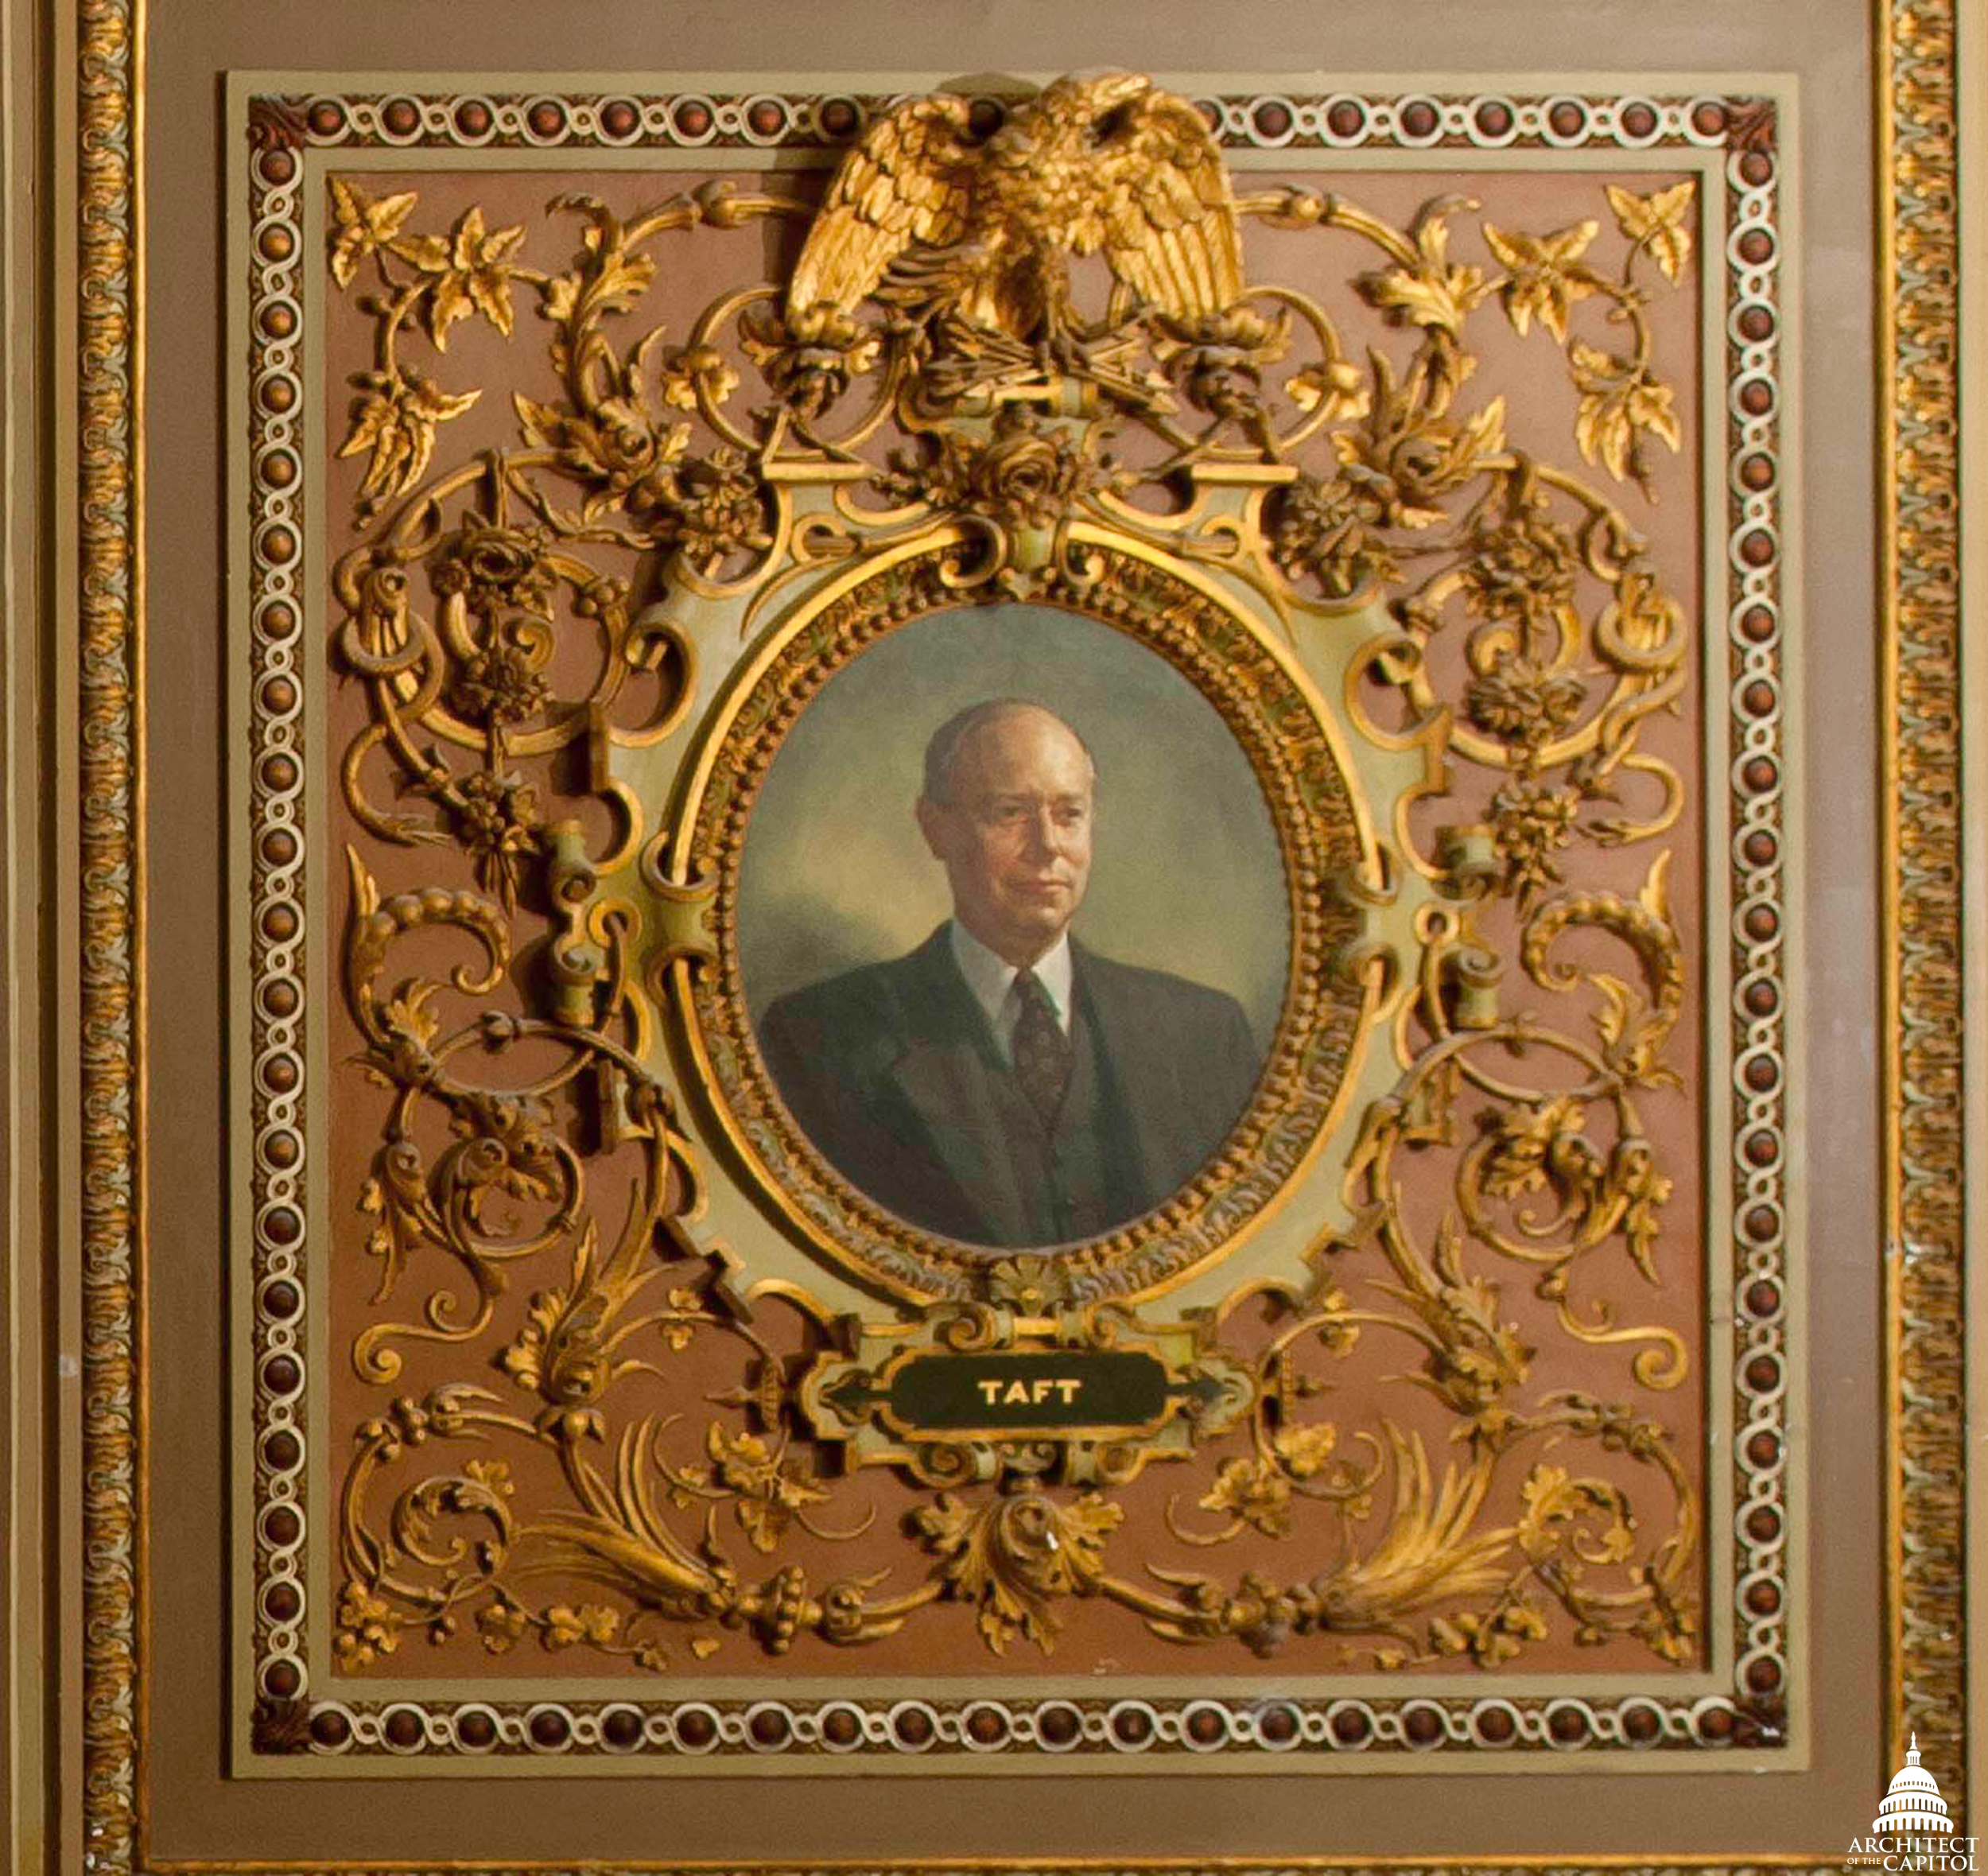 Photo of Robert Taft portriat by Deanne Keller, one of the Monuments Men.